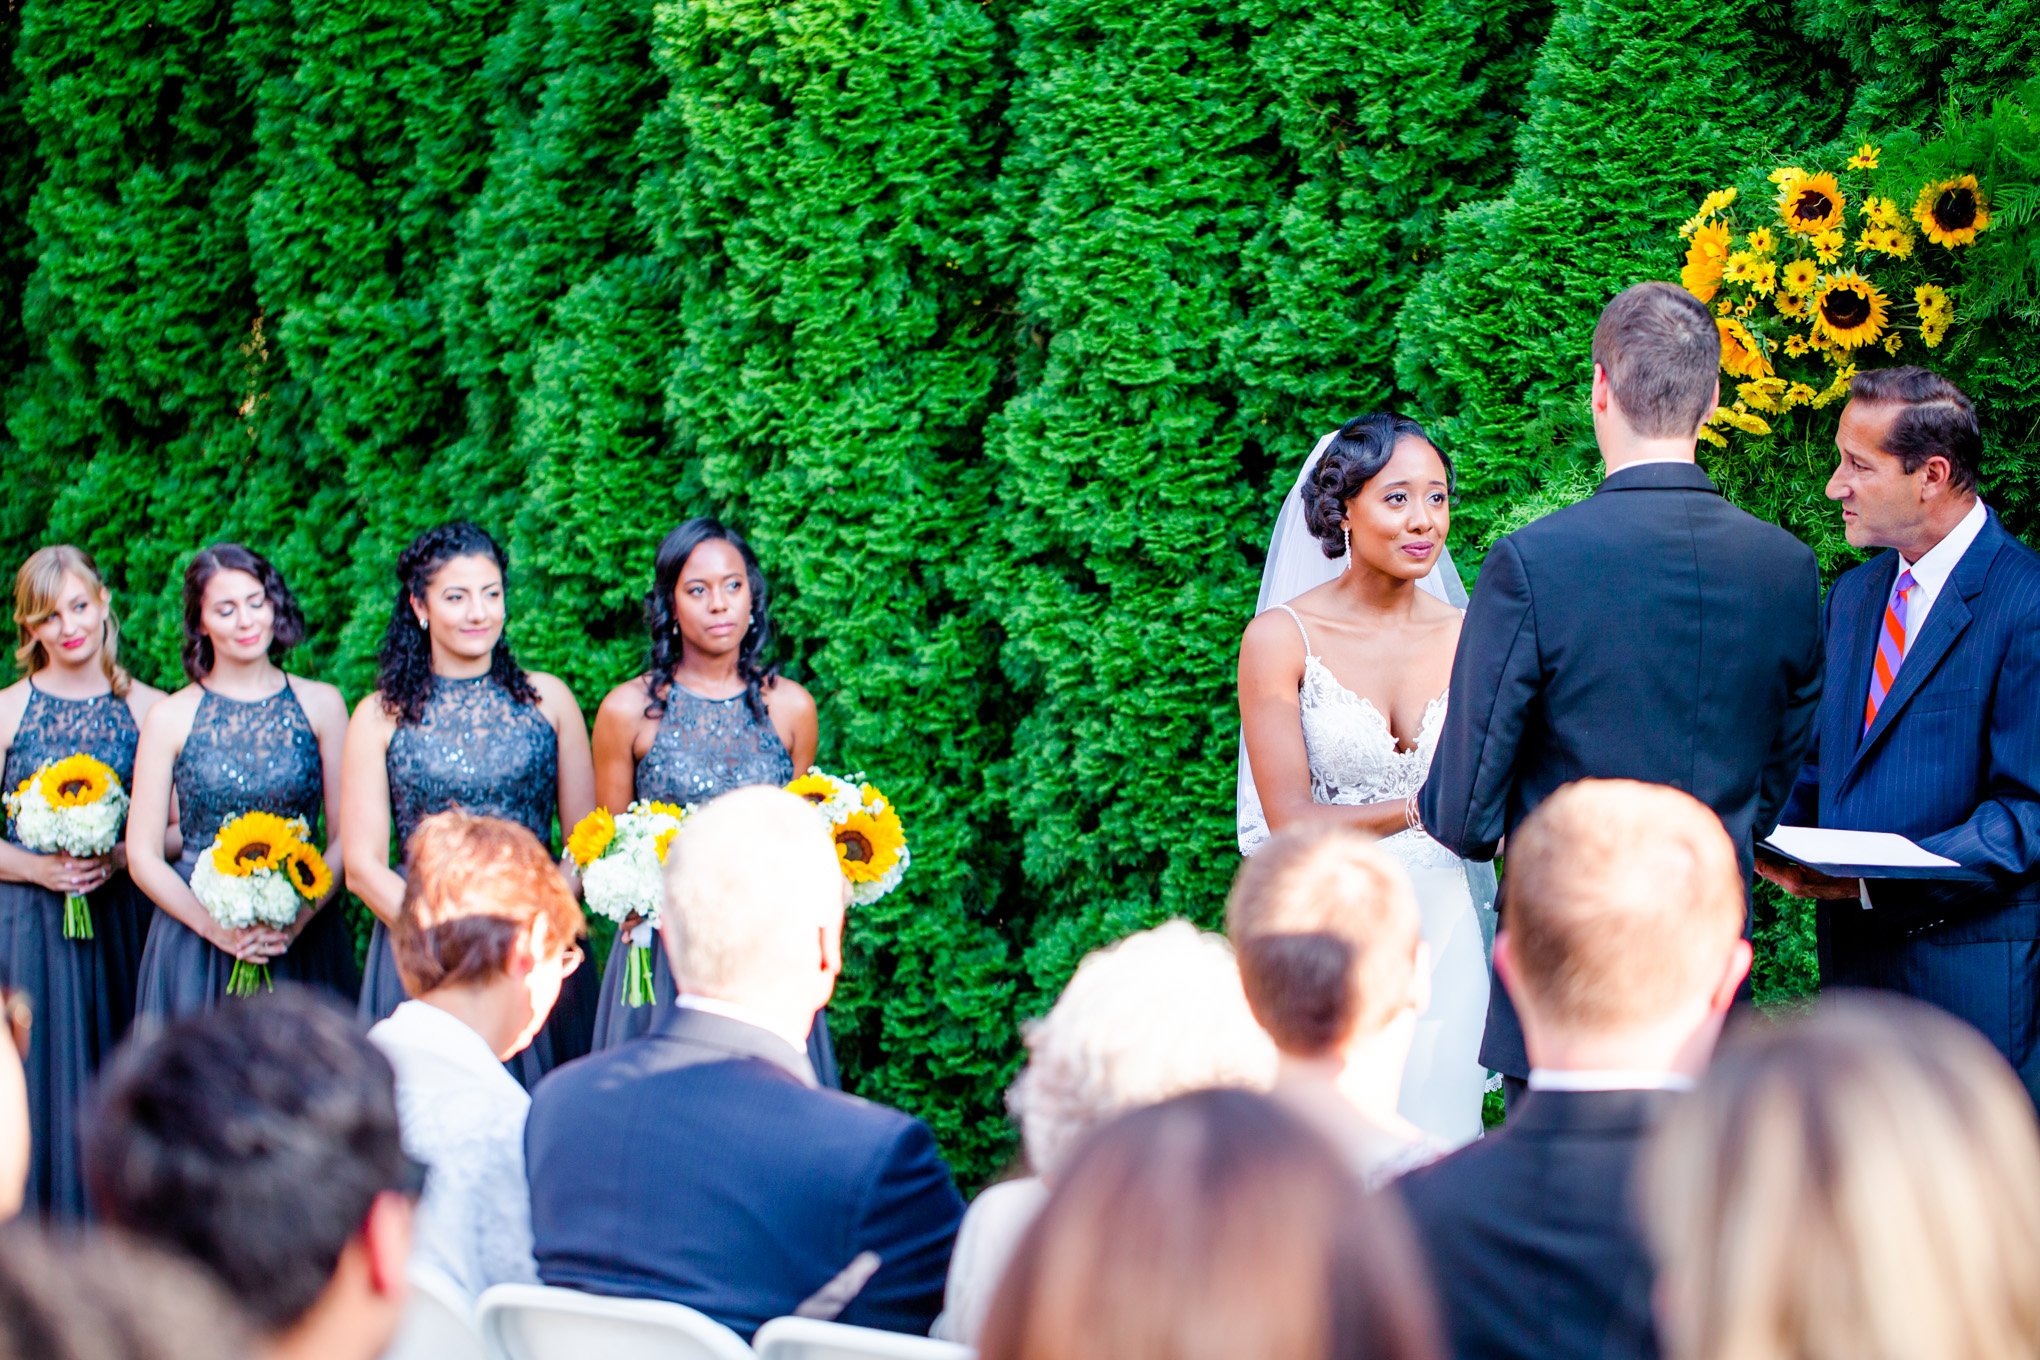 summer mansion at valley country club wedding, Maryland wedding, MD wedding, Maryland wedding photographer, summer wedding, summer wedding inspiration, Baltimore wedding photographer, DC wedding photographer, country club wedding, yellow aesthetic, Rachel E.H. Photography, wedding vows